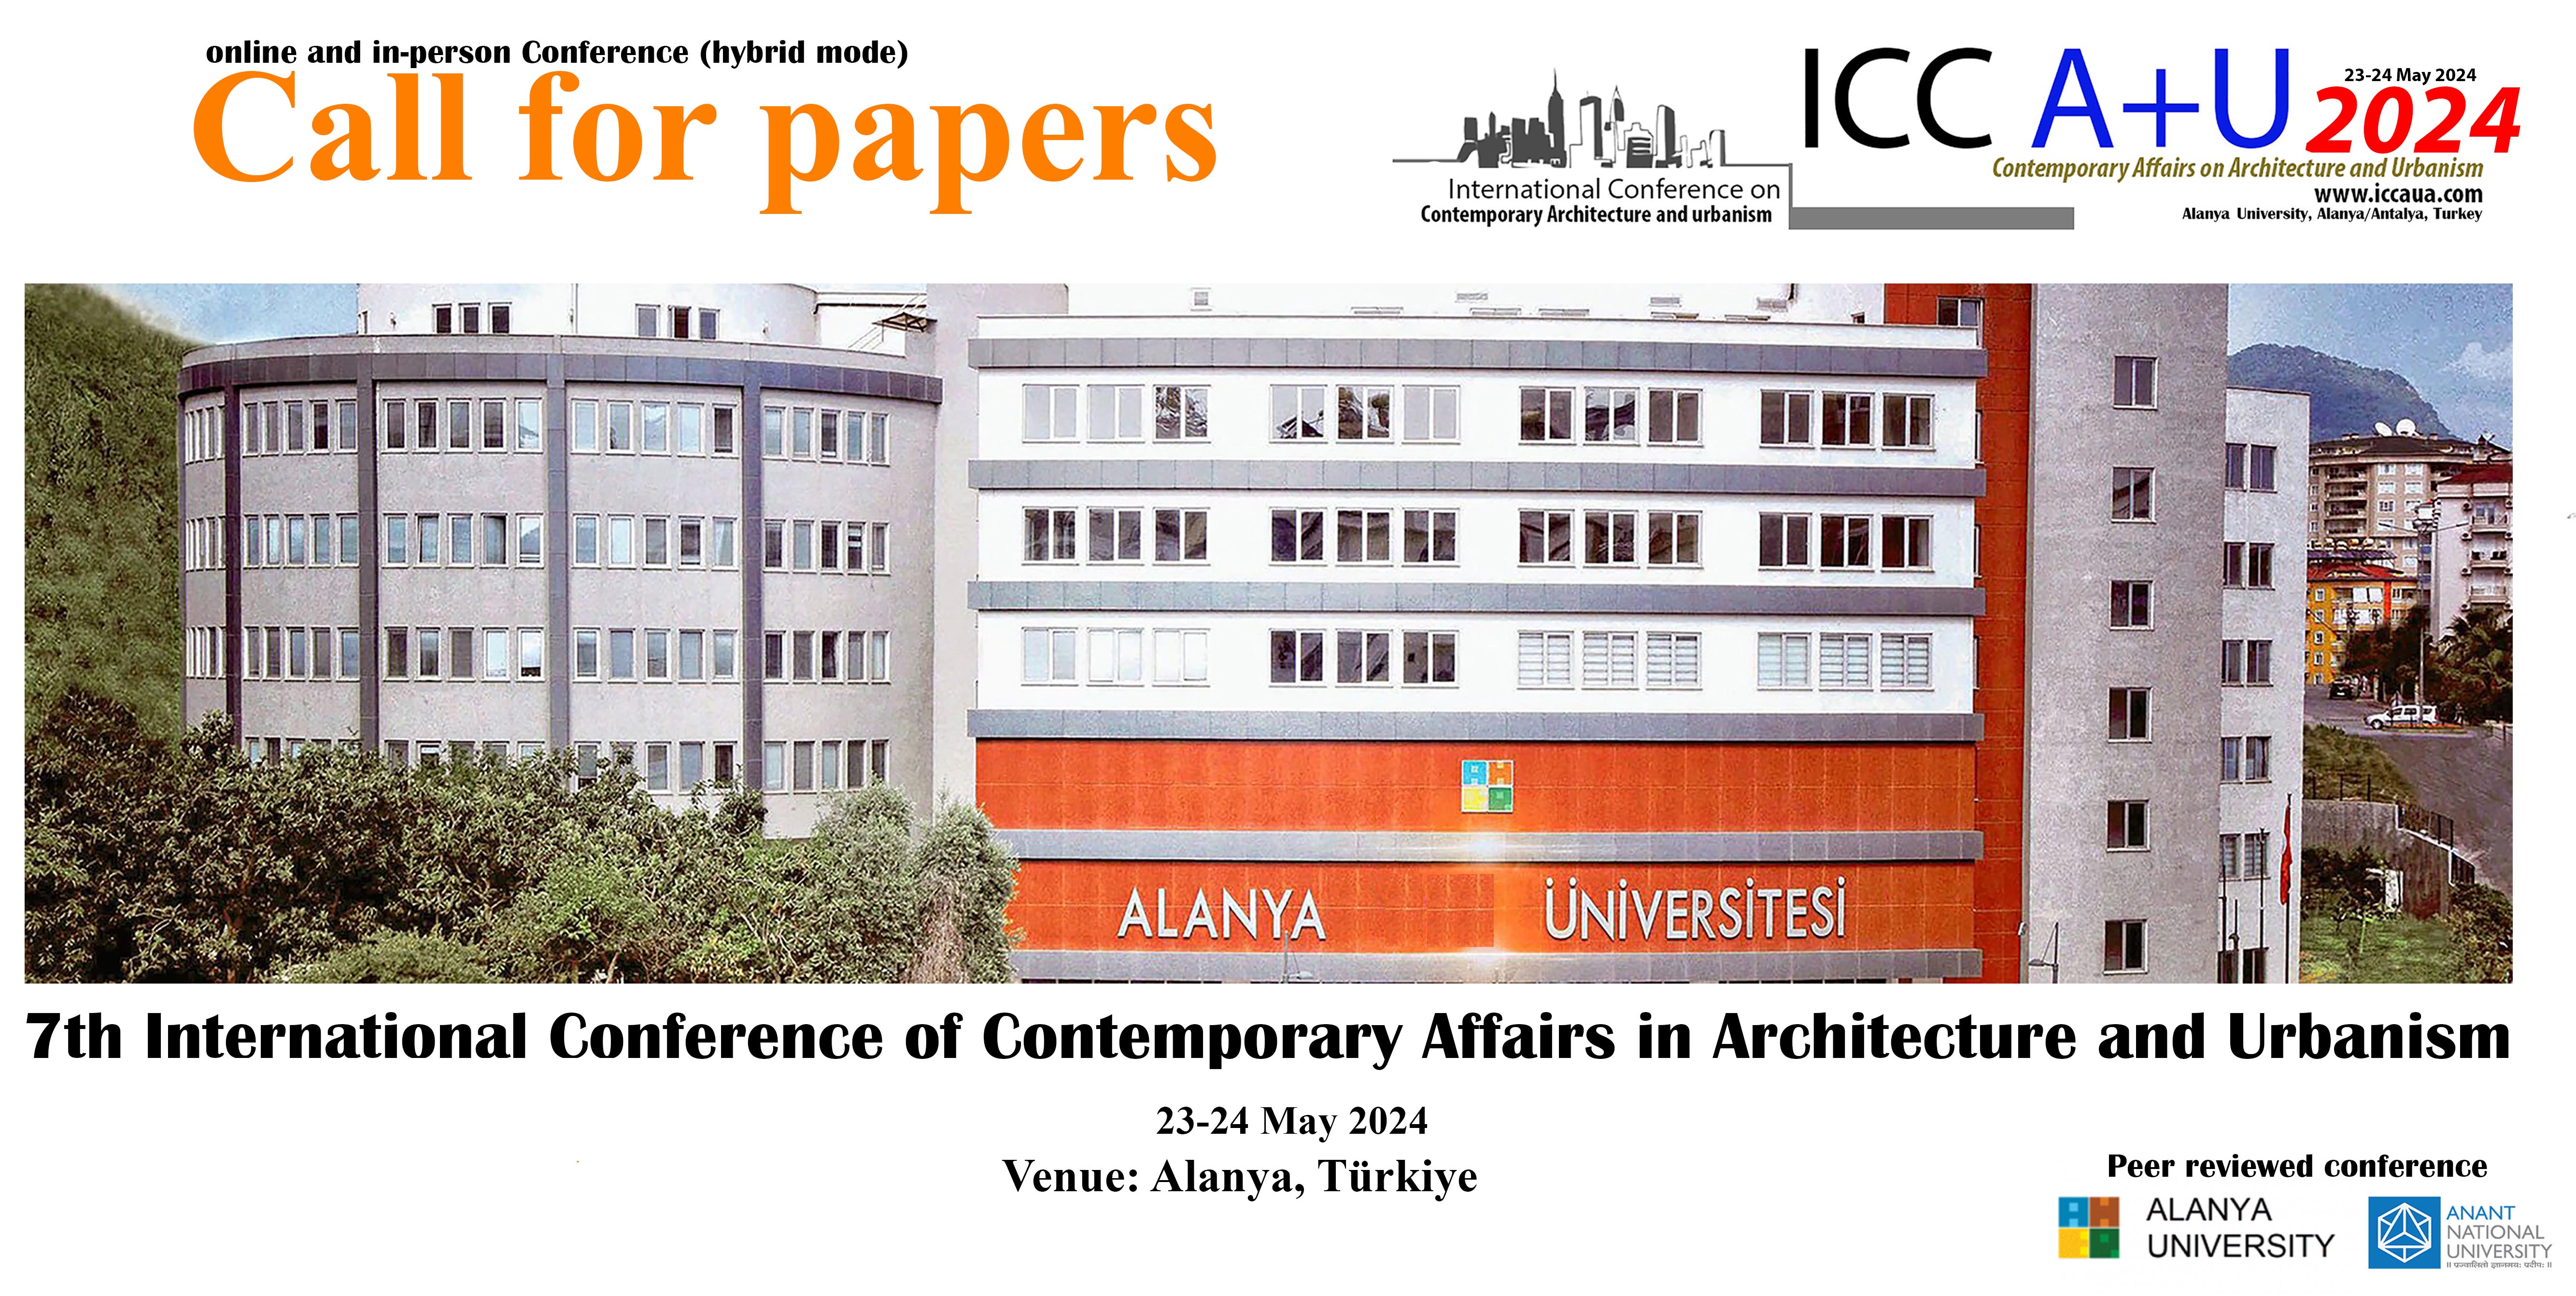 6th International conference of Contemporary Affairs on Architecture and Urbanism 2023 ICCAUA ALANYA HEP UNIVERSITY